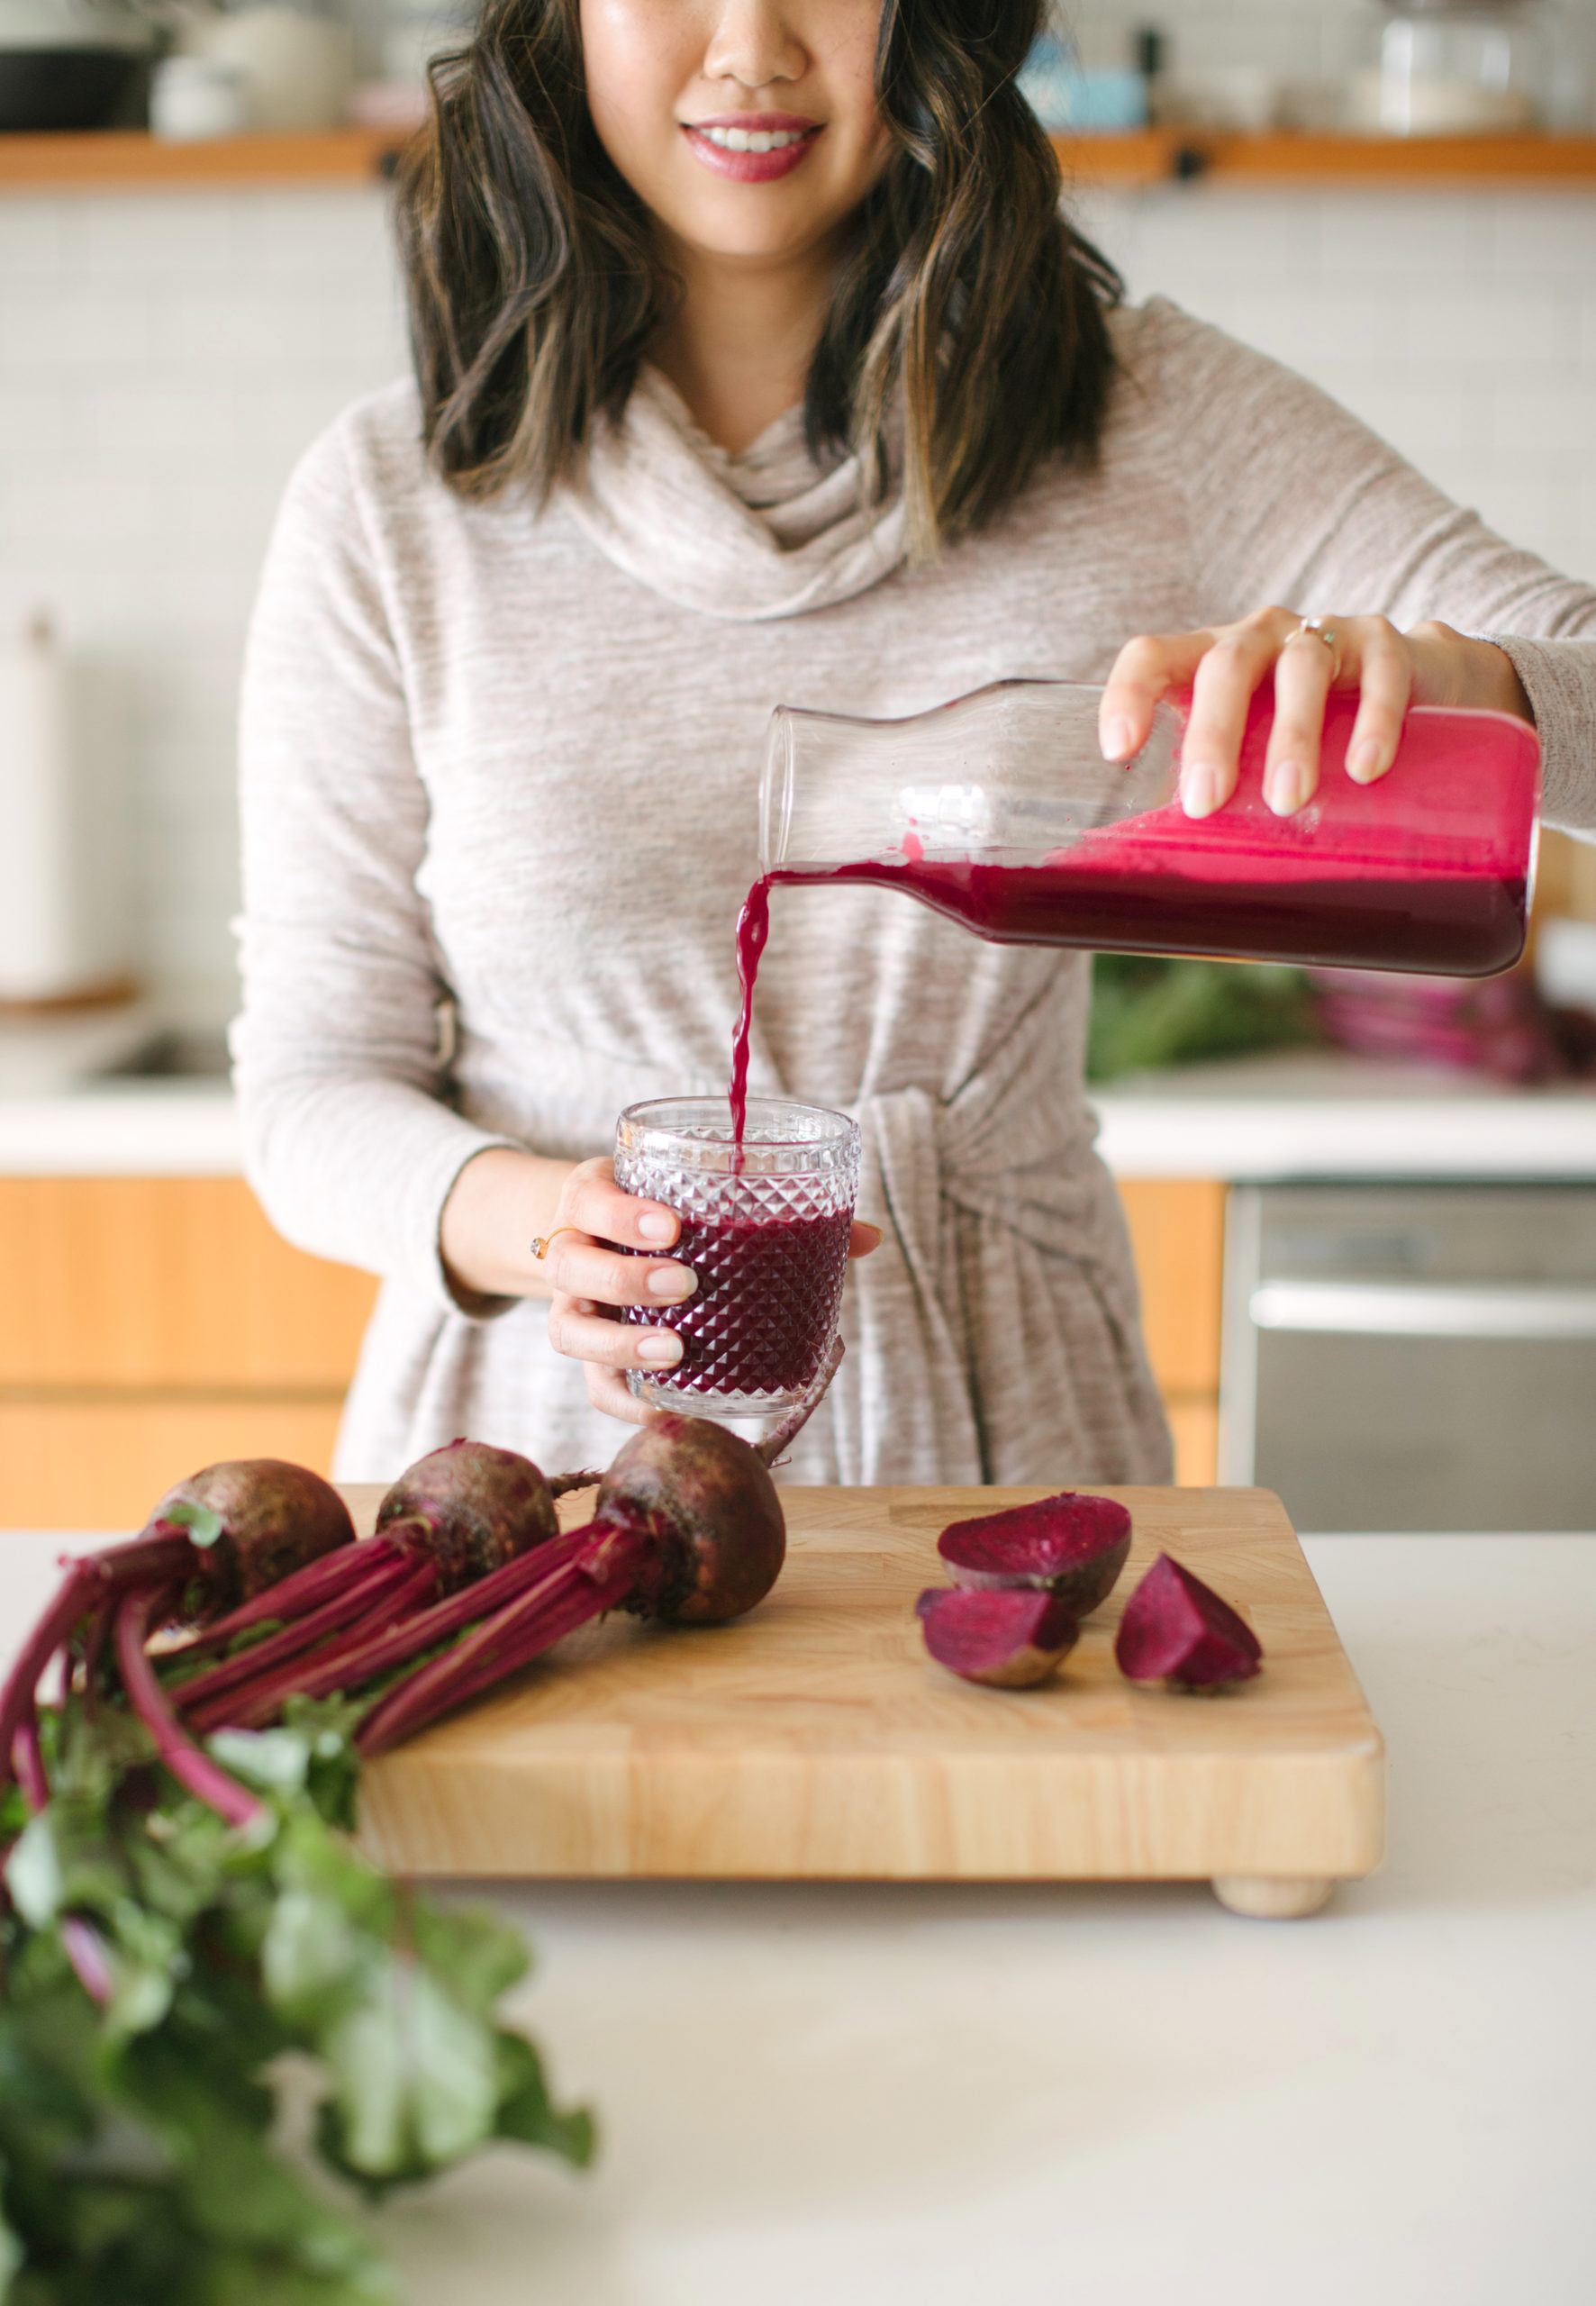 Anti-inflammatory juice containing beets, carrots, ginger and more to protect against illness. One of the most refreshing juices I've ever had! #freshjuice #antiinflammatory #guthealth #TheDimpleLife